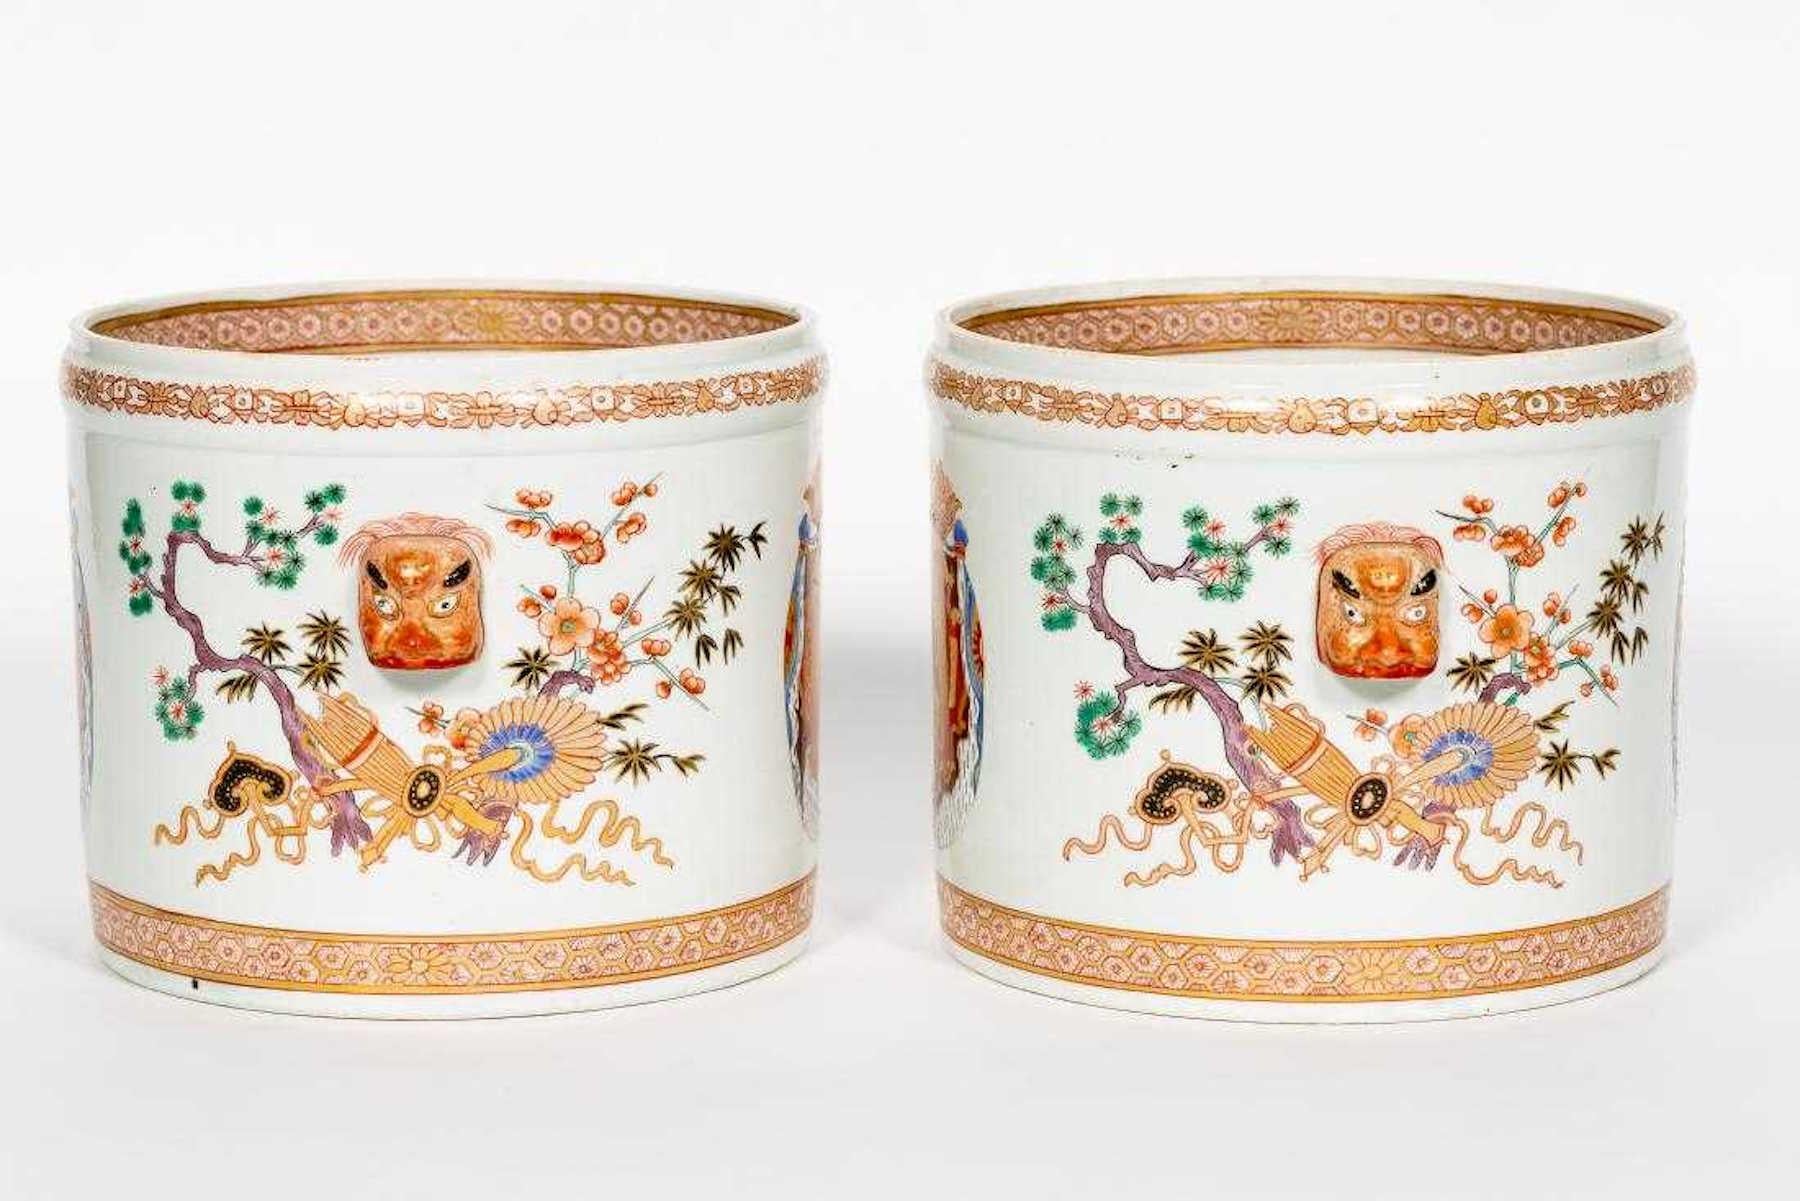 Chinese Export style armorial cachepots with mask handles. Finely decorated inside and out, marked with red cypher mark.